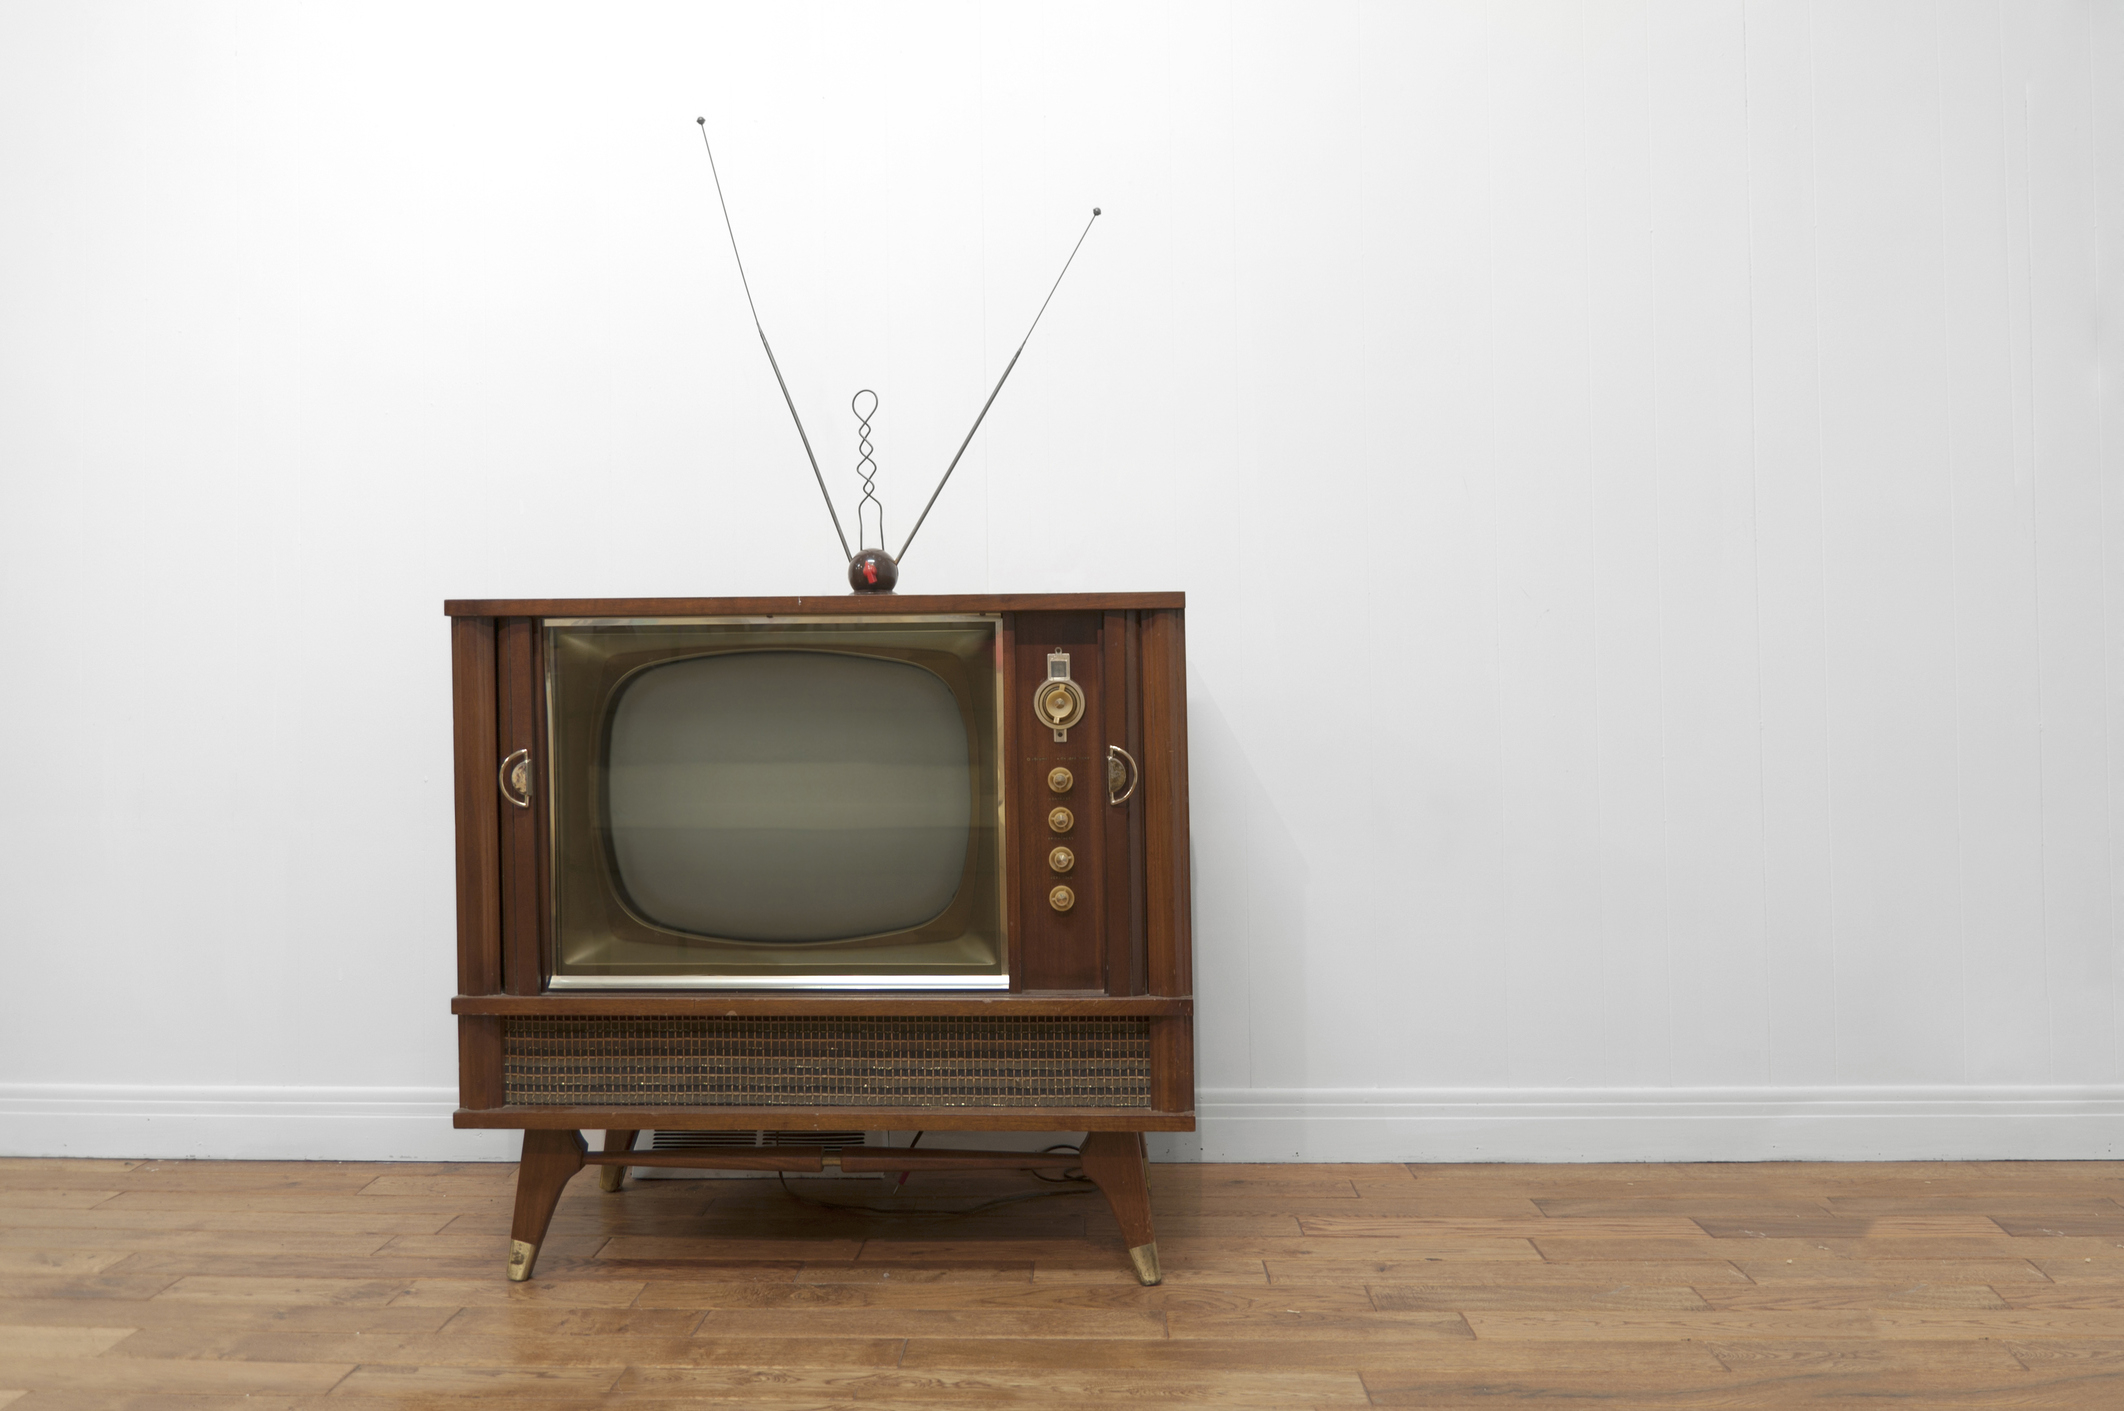 Vintage television with rabbit-ear antenna on a wood floor against a plain wall